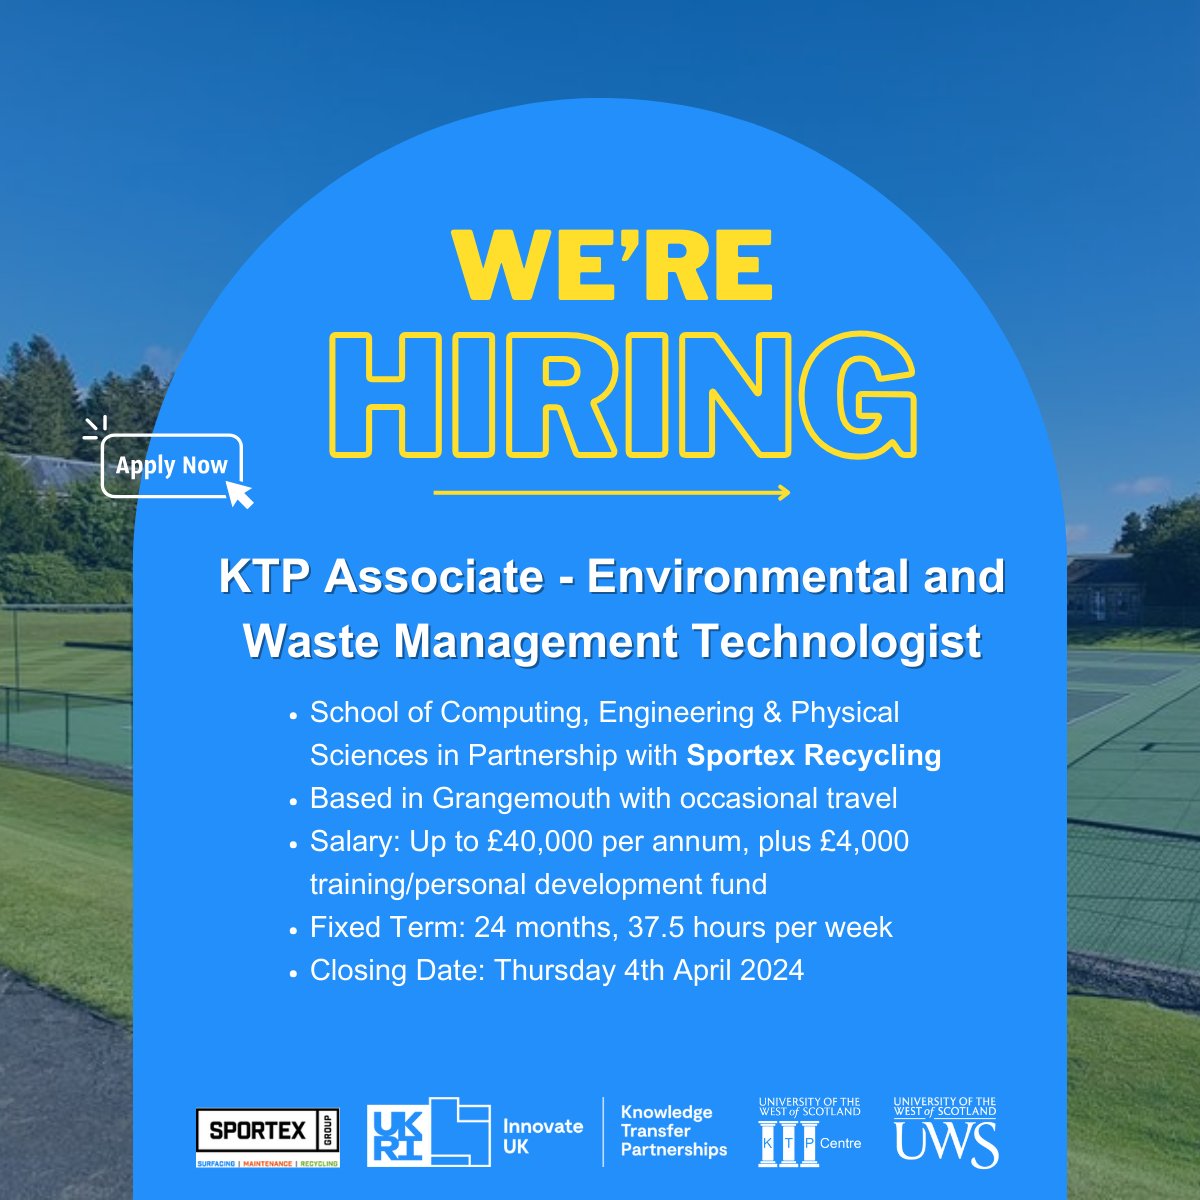 #wearehiring Not long left to apply! Reminder that we're advertising for a #KTP Associate with Sportex Recycling and @UniWestScotland♻ Apply now before it's too late: ce0974li.webitrent.com/ce0974li_webre…